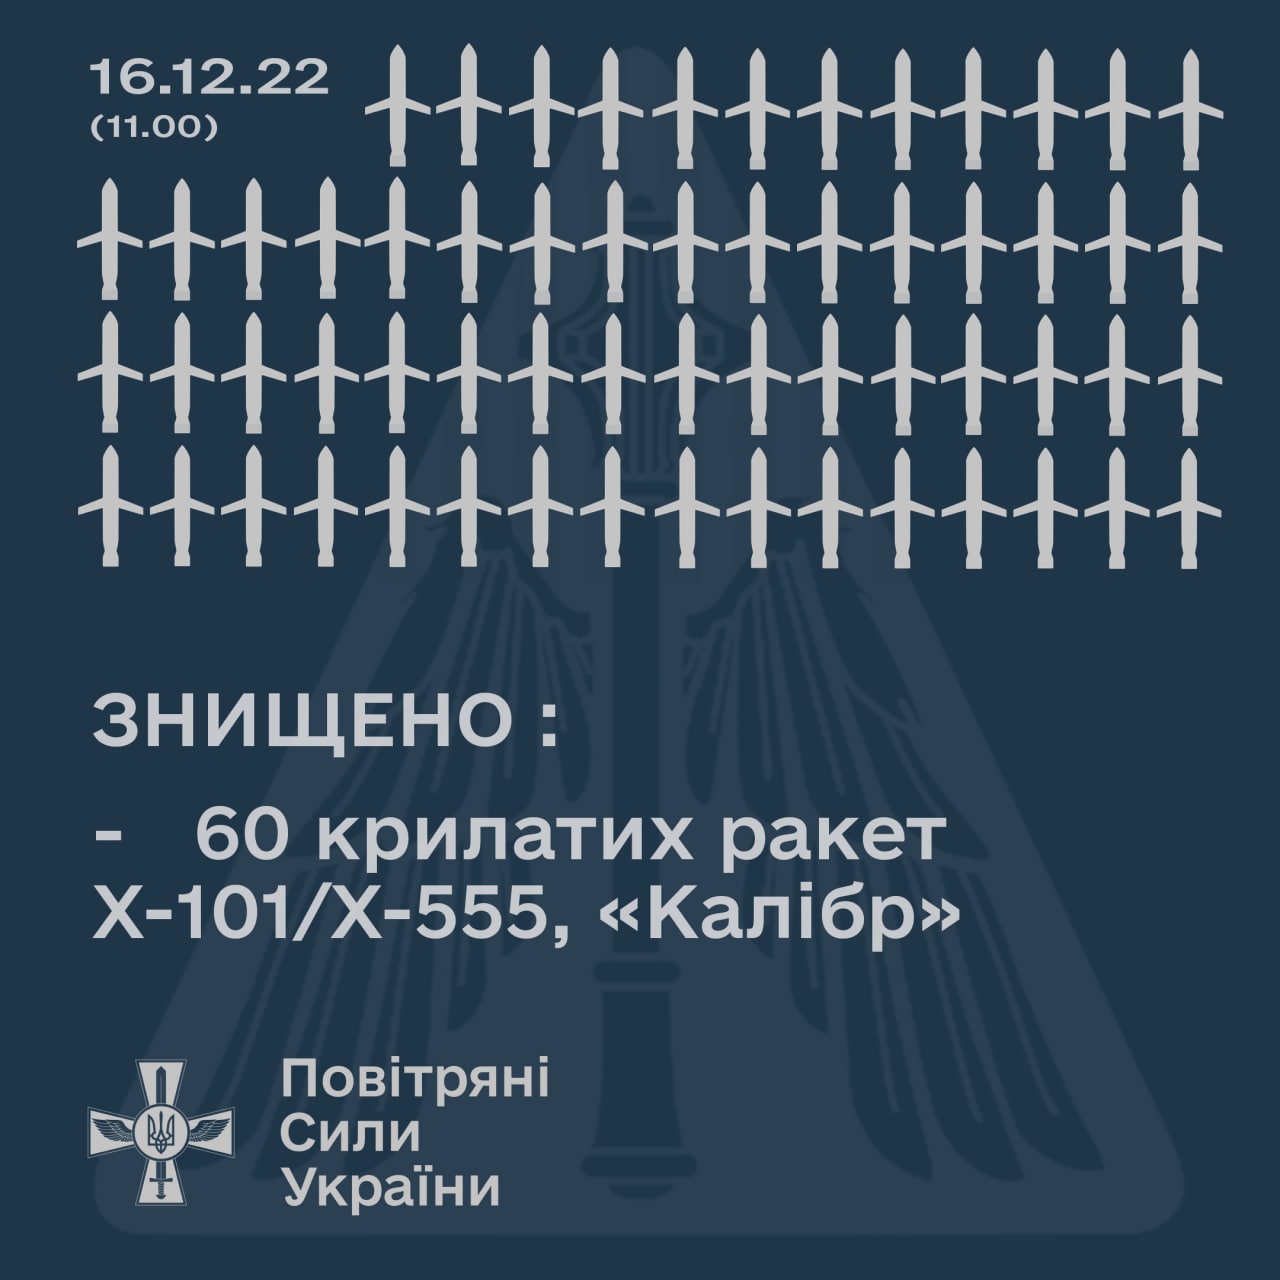 On December 16, 2023, Ukrainian air defense took down 16 missiles out of total 76